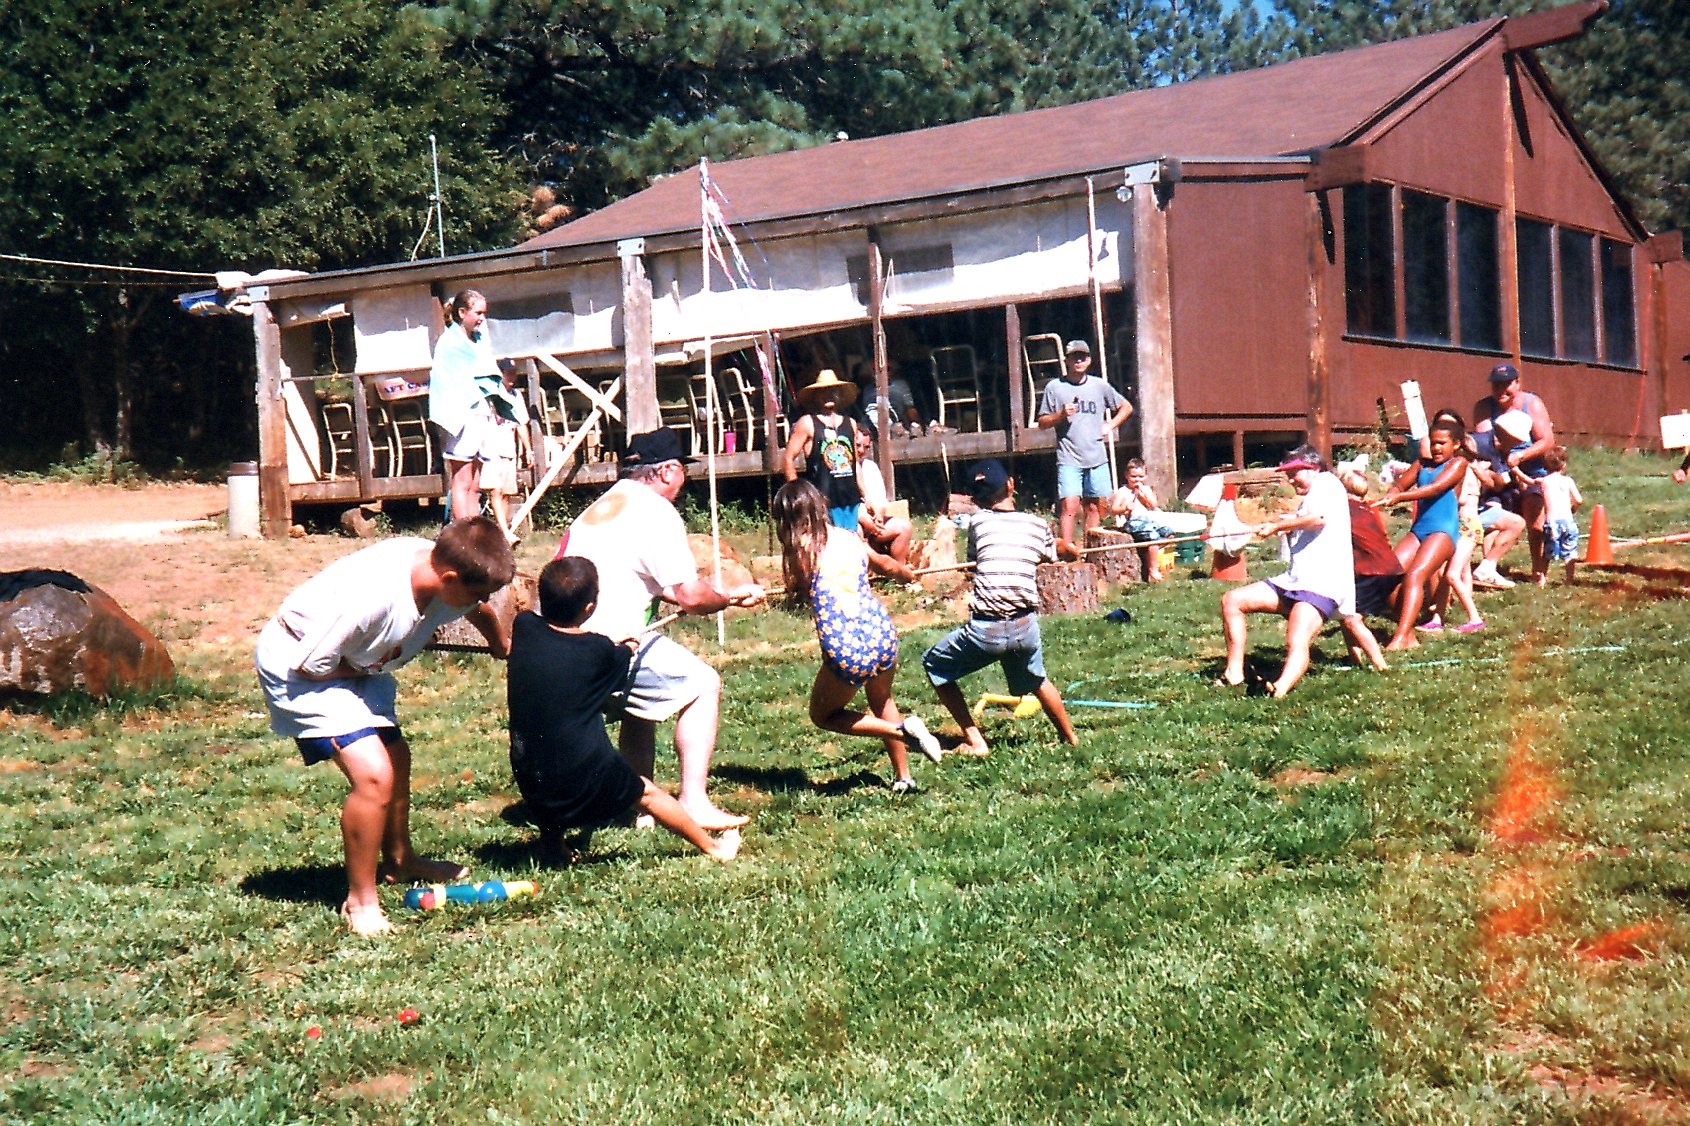 Family Camp 1998 history tug of war on grass